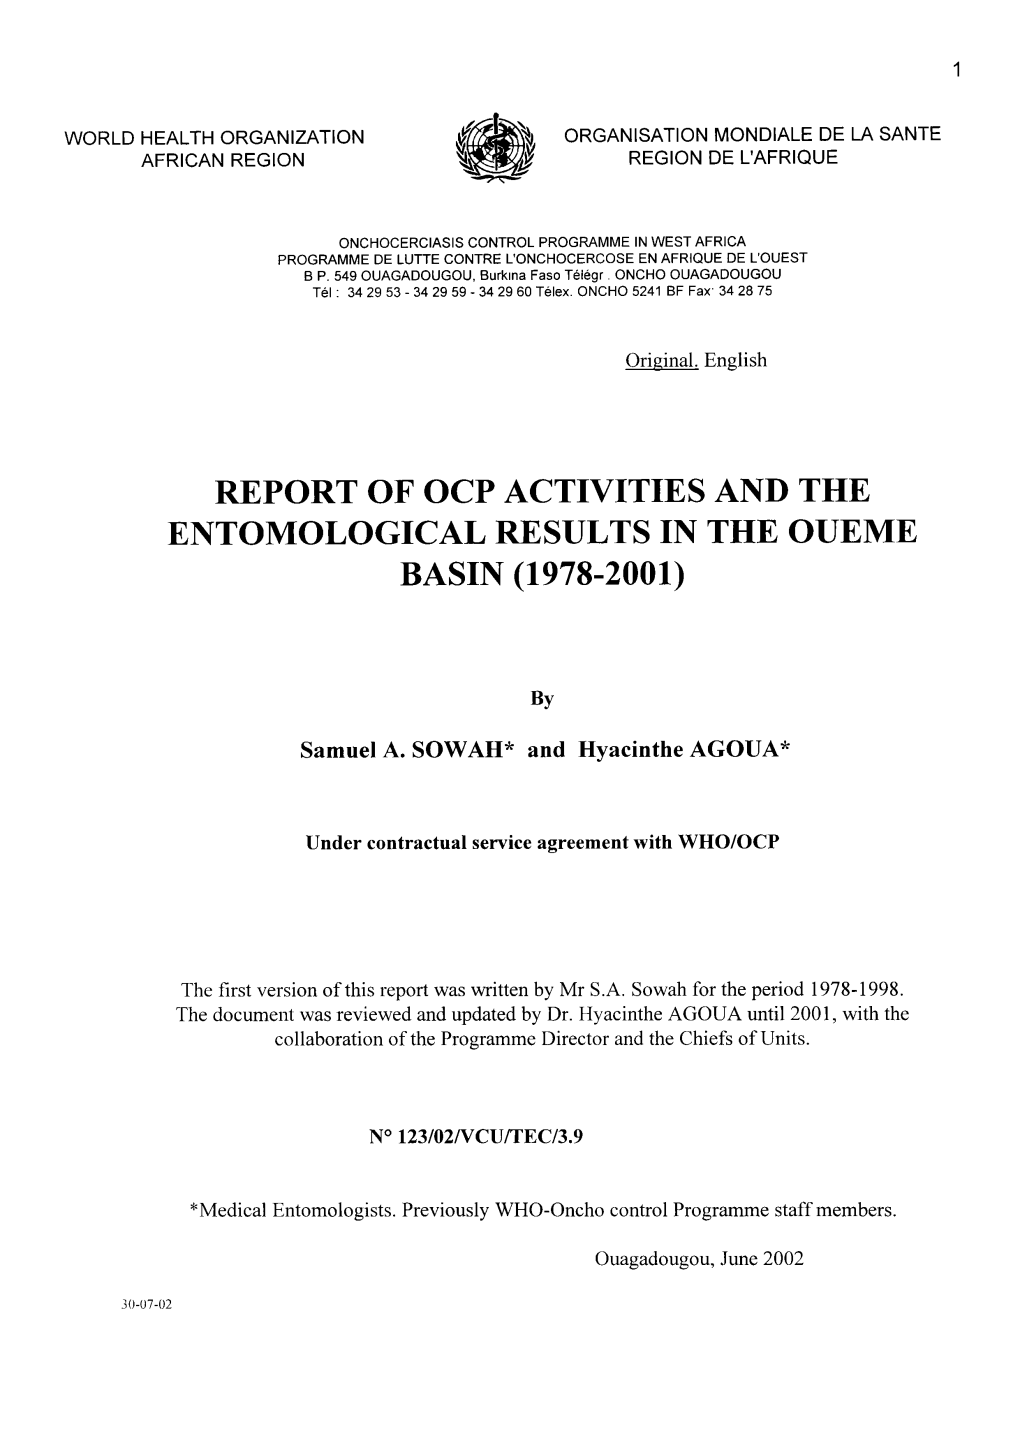 REPORT of OCP ACTIVITIES and the ENTOMOLOGICAL RESULTS in the OUEME Basrn (1978-2001)